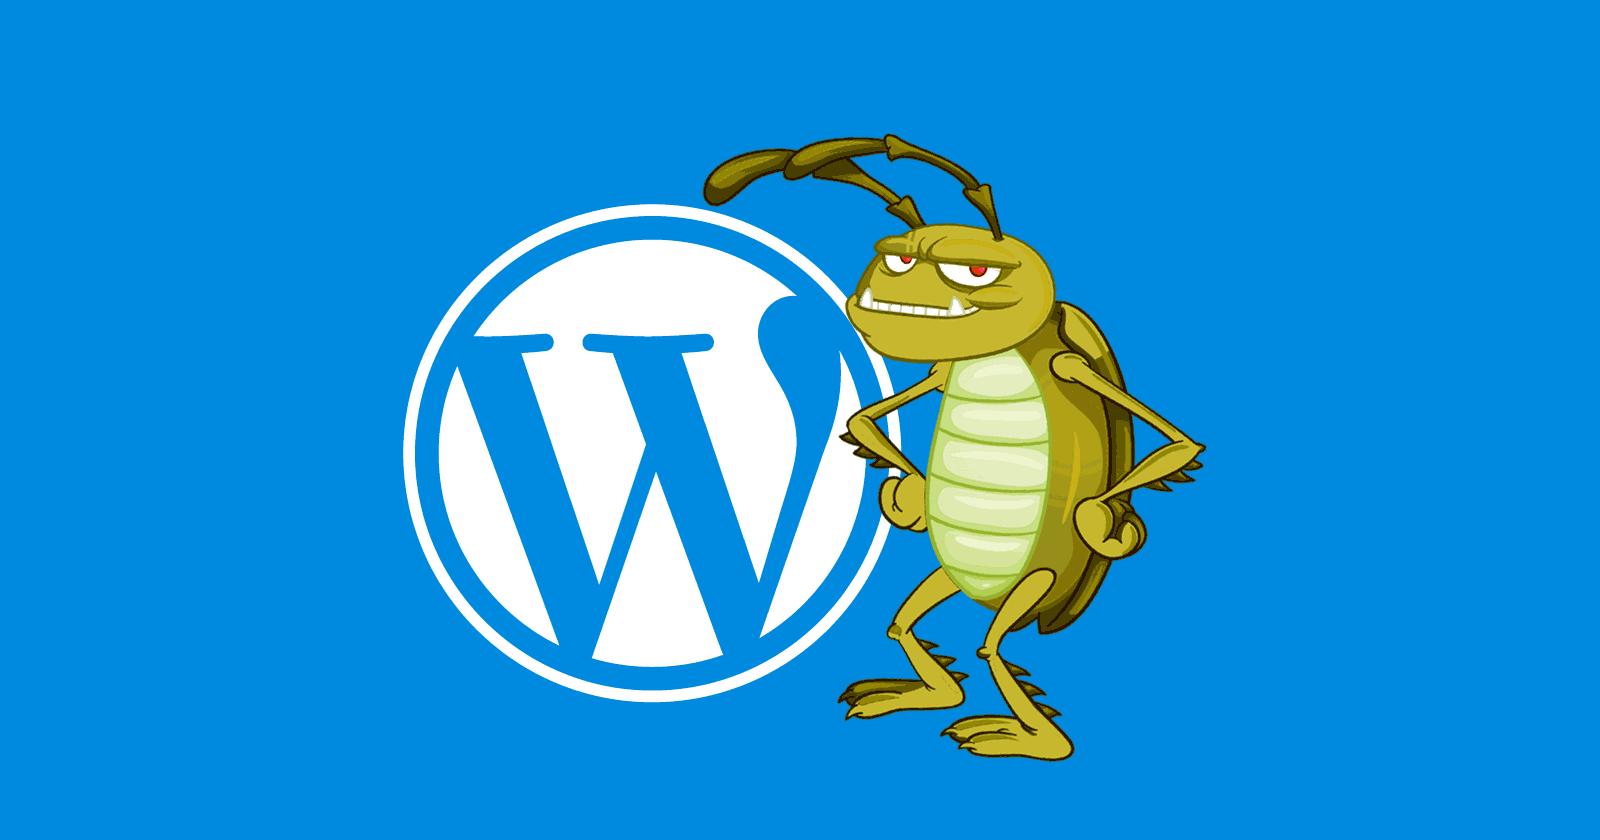 Image of the WordPress logo with a green bug standing beside it, with a malicious expression on its face